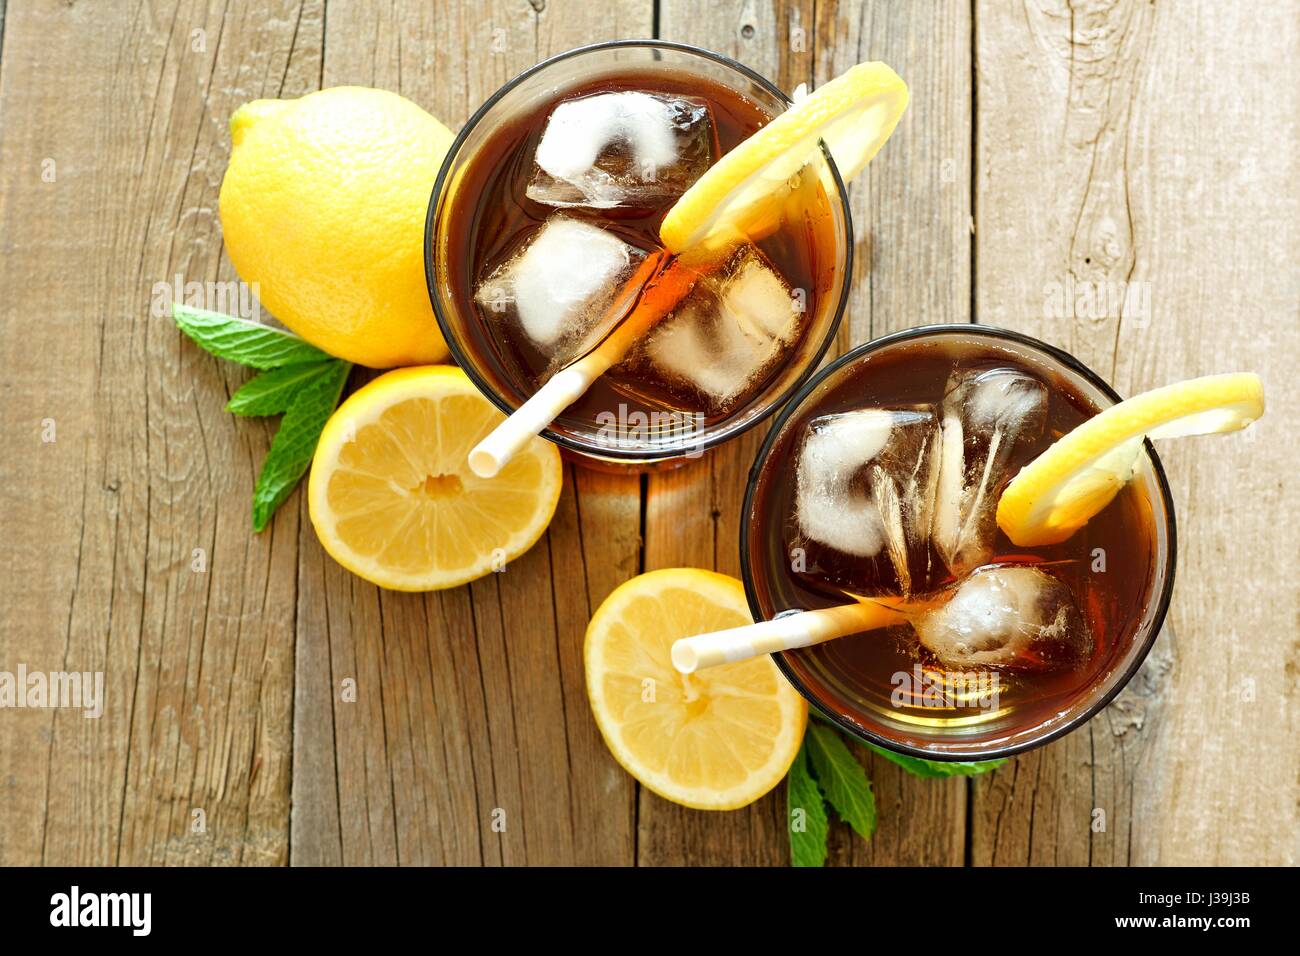 Two glasses of iced tea with lemon, overhead view on a rustic wooden background Stock Photo